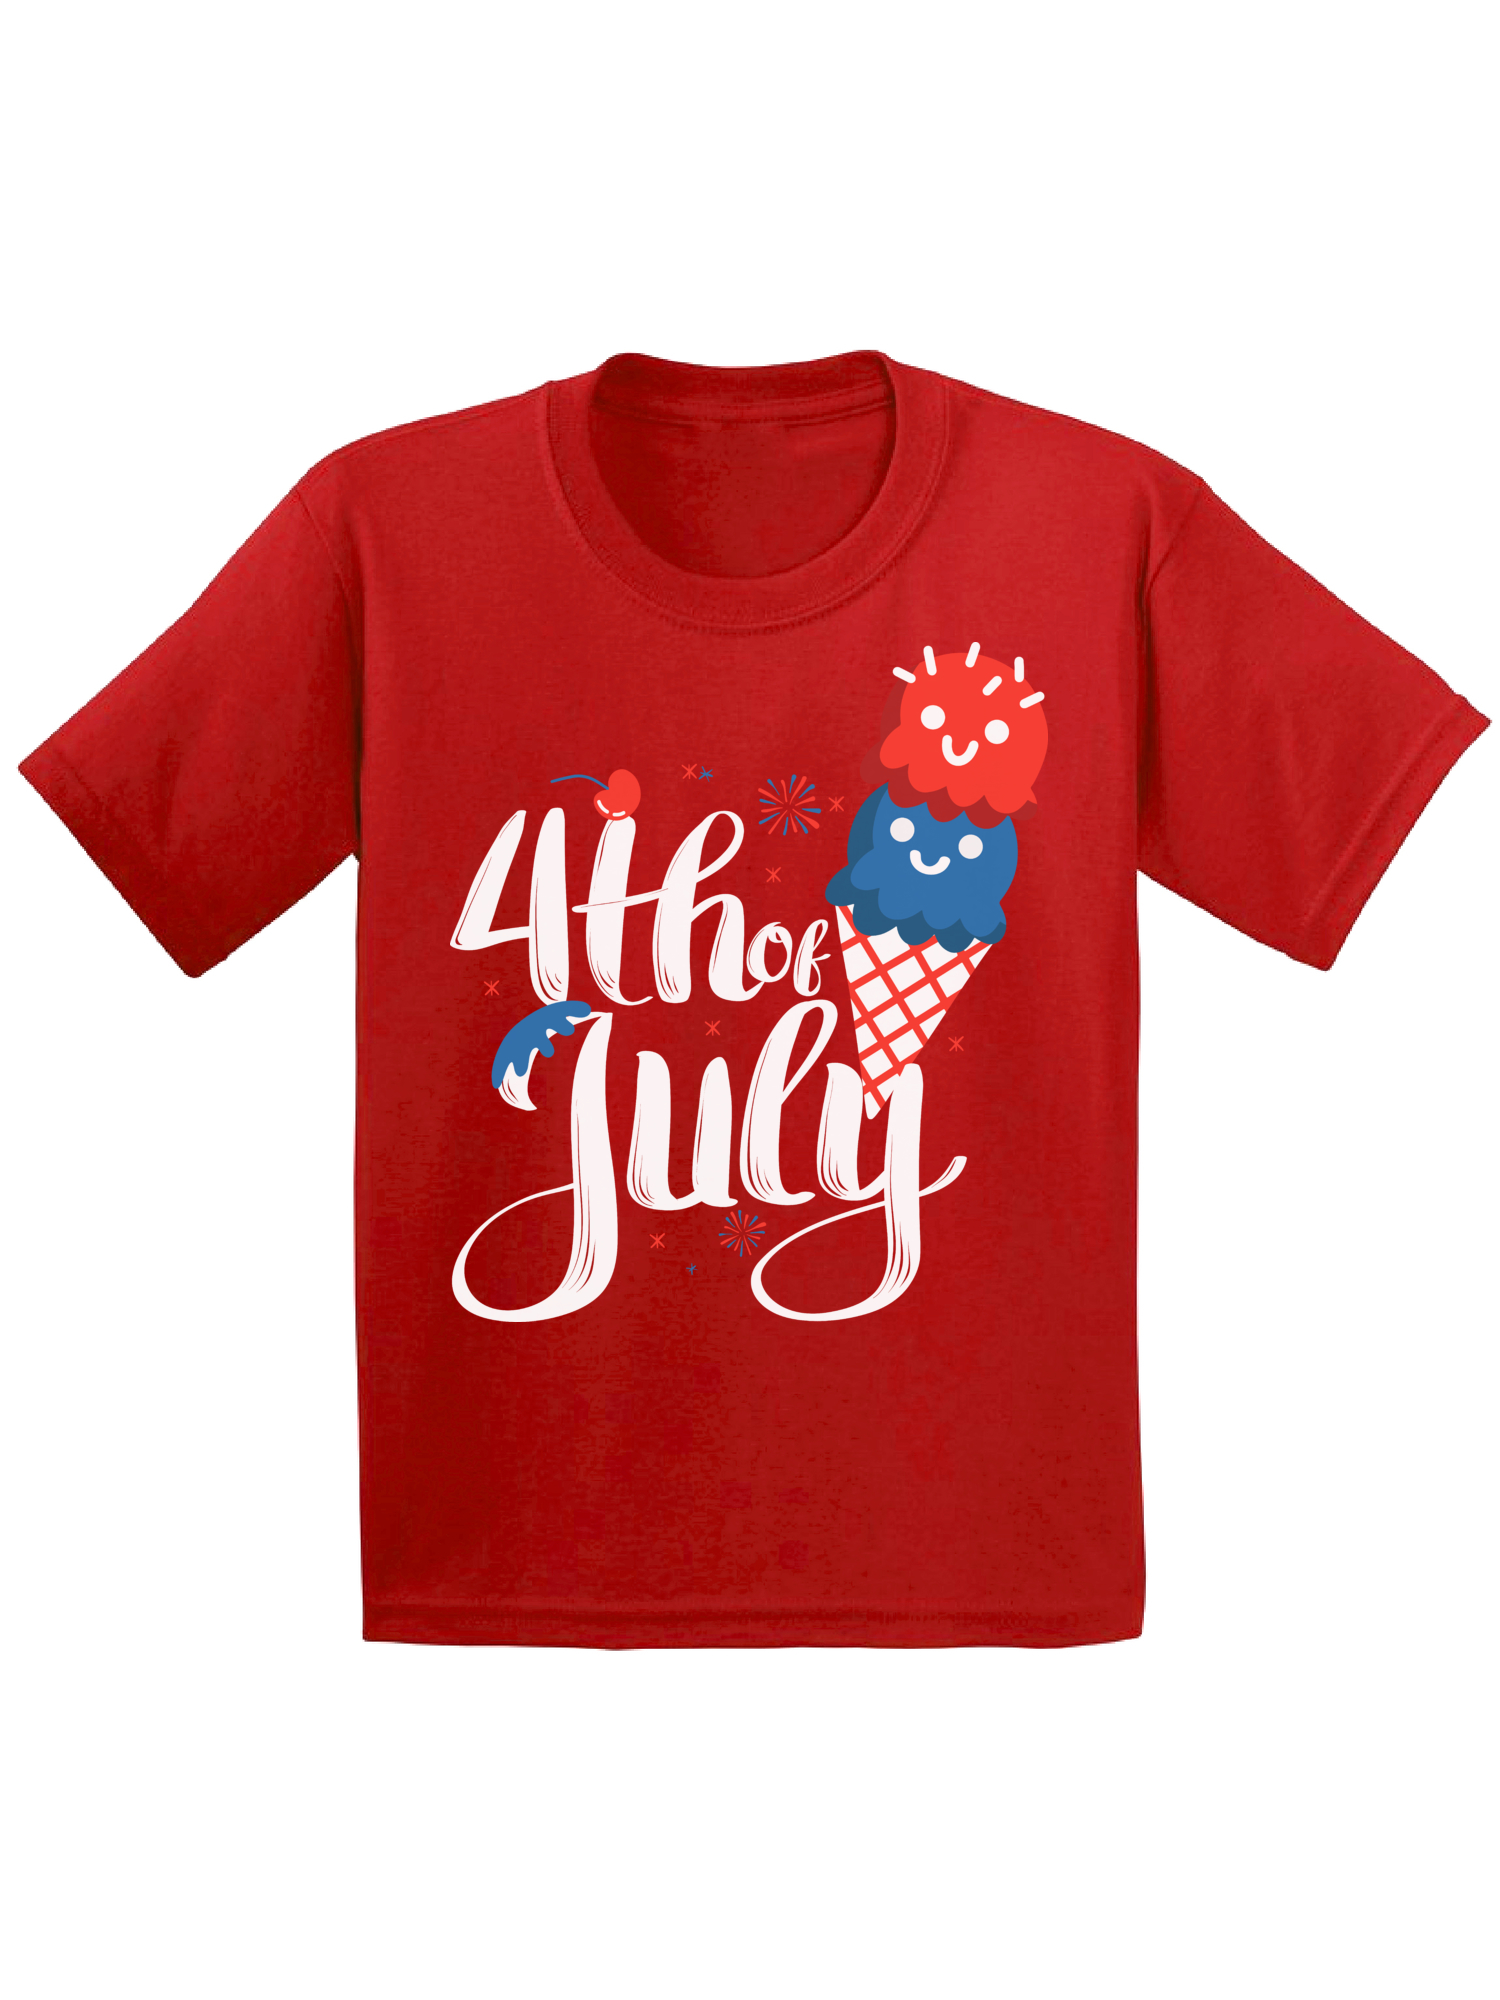 Awkward Styles Toddler T Shirt 4th of July T-Shirt Ice Cream Shirt Girls Clothes Boys T Shirt Outfit for Kids Patriotic Gifts USA Holiday Outfit for Children Ice Cream T-Shirt Ice Cream Lovers Tshirt - image 1 of 4